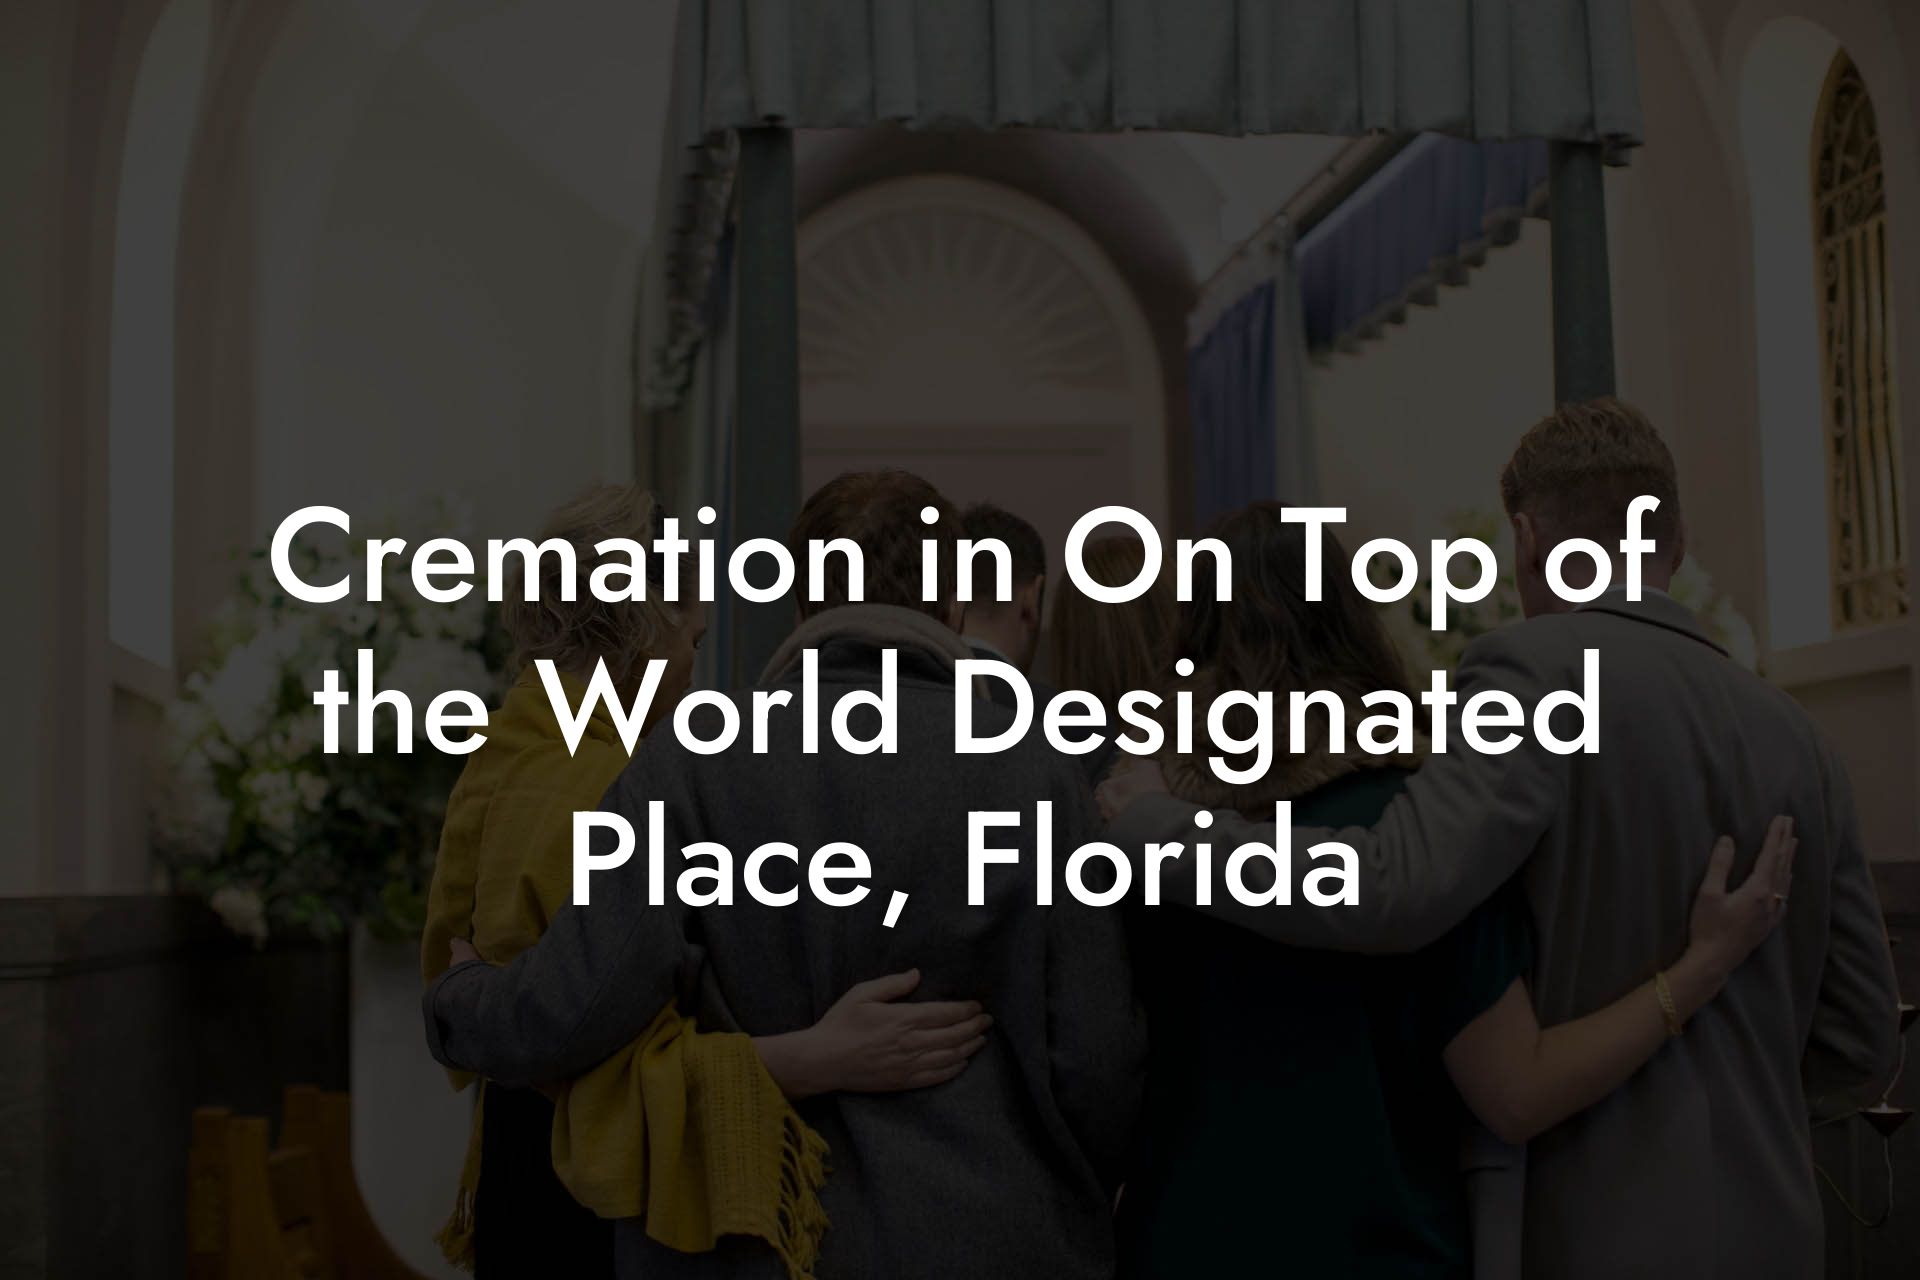 Cremation in On Top of the World Designated Place, Florida